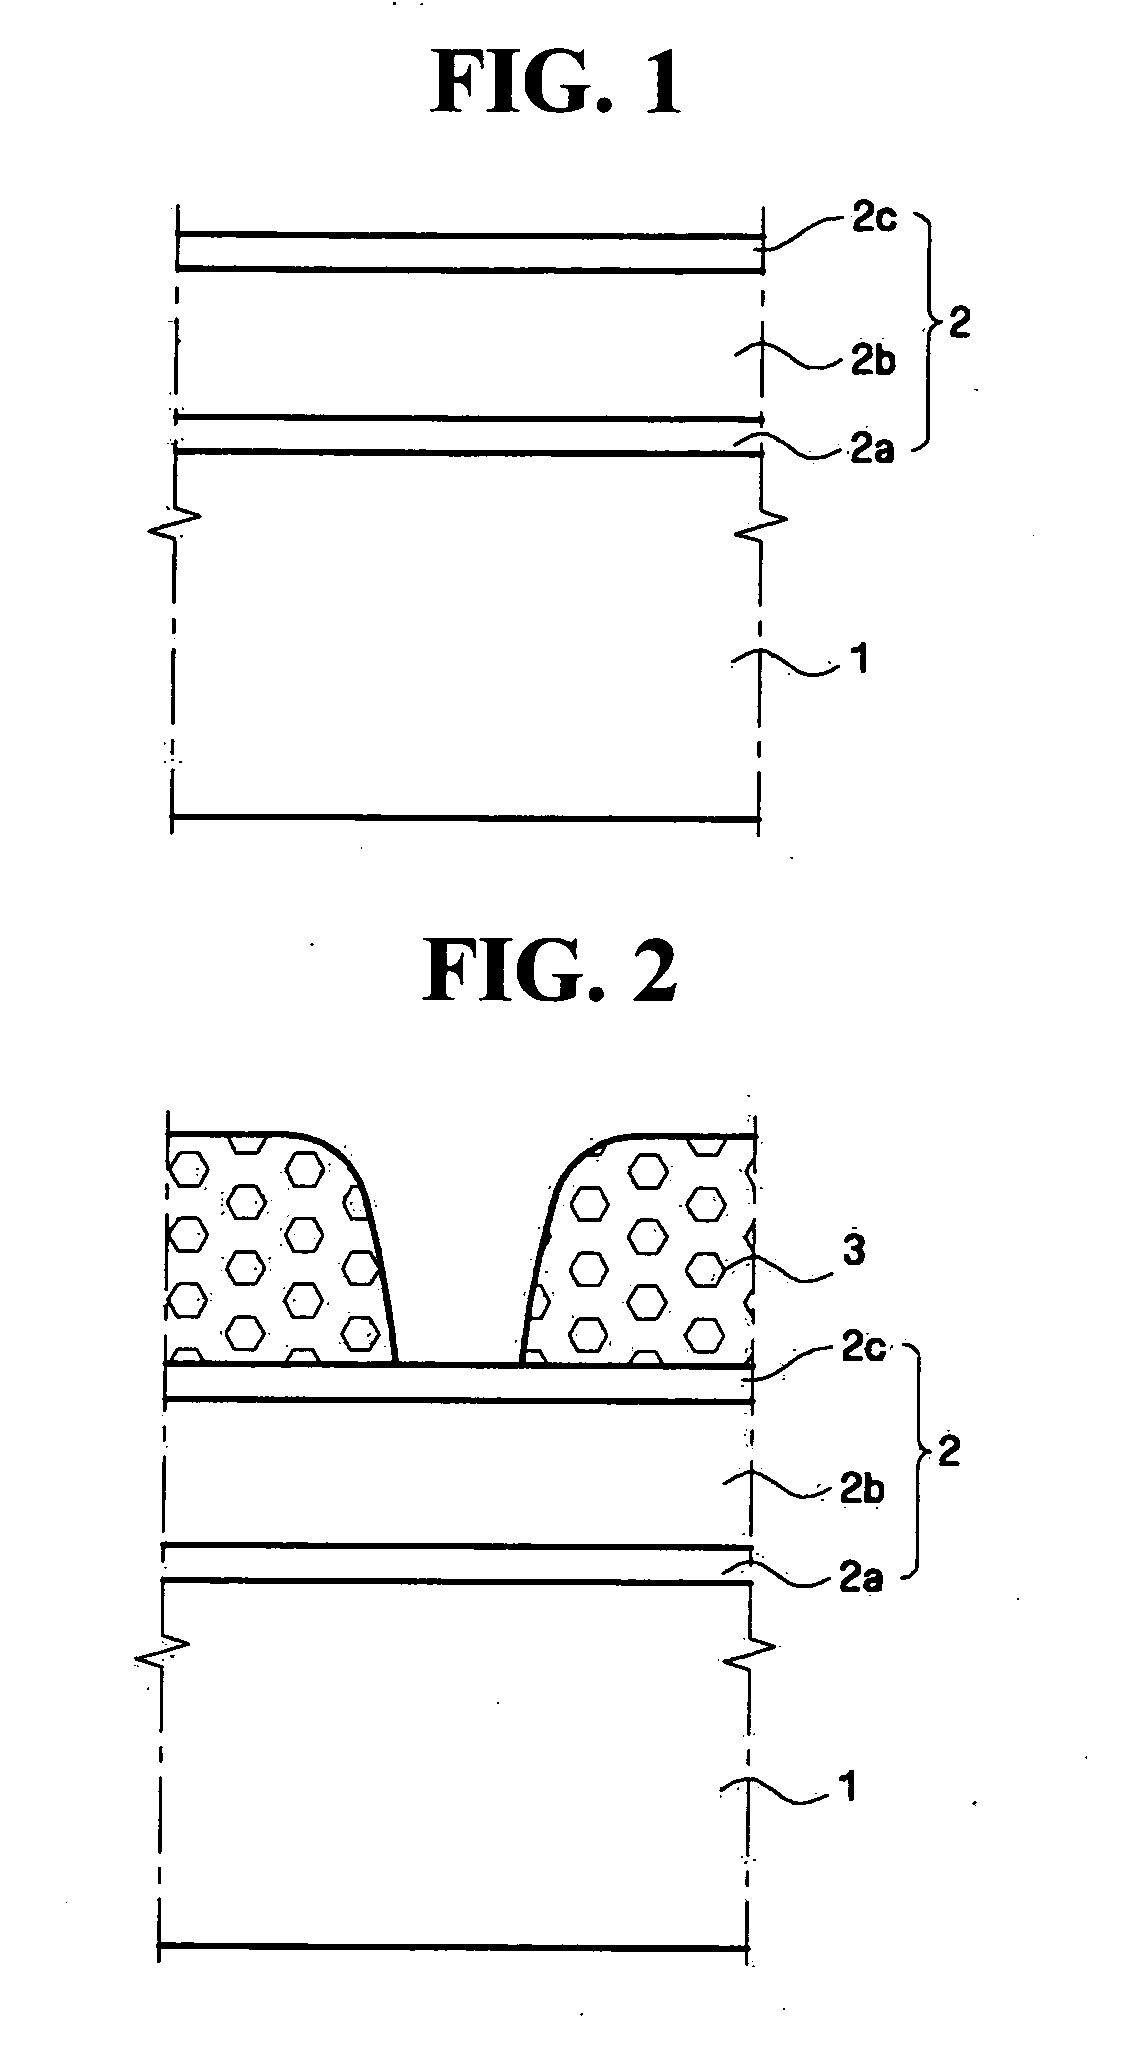 Photoresist stripper composition and methods for forming wire structures and for fabricating thin film transistor substrate using composition